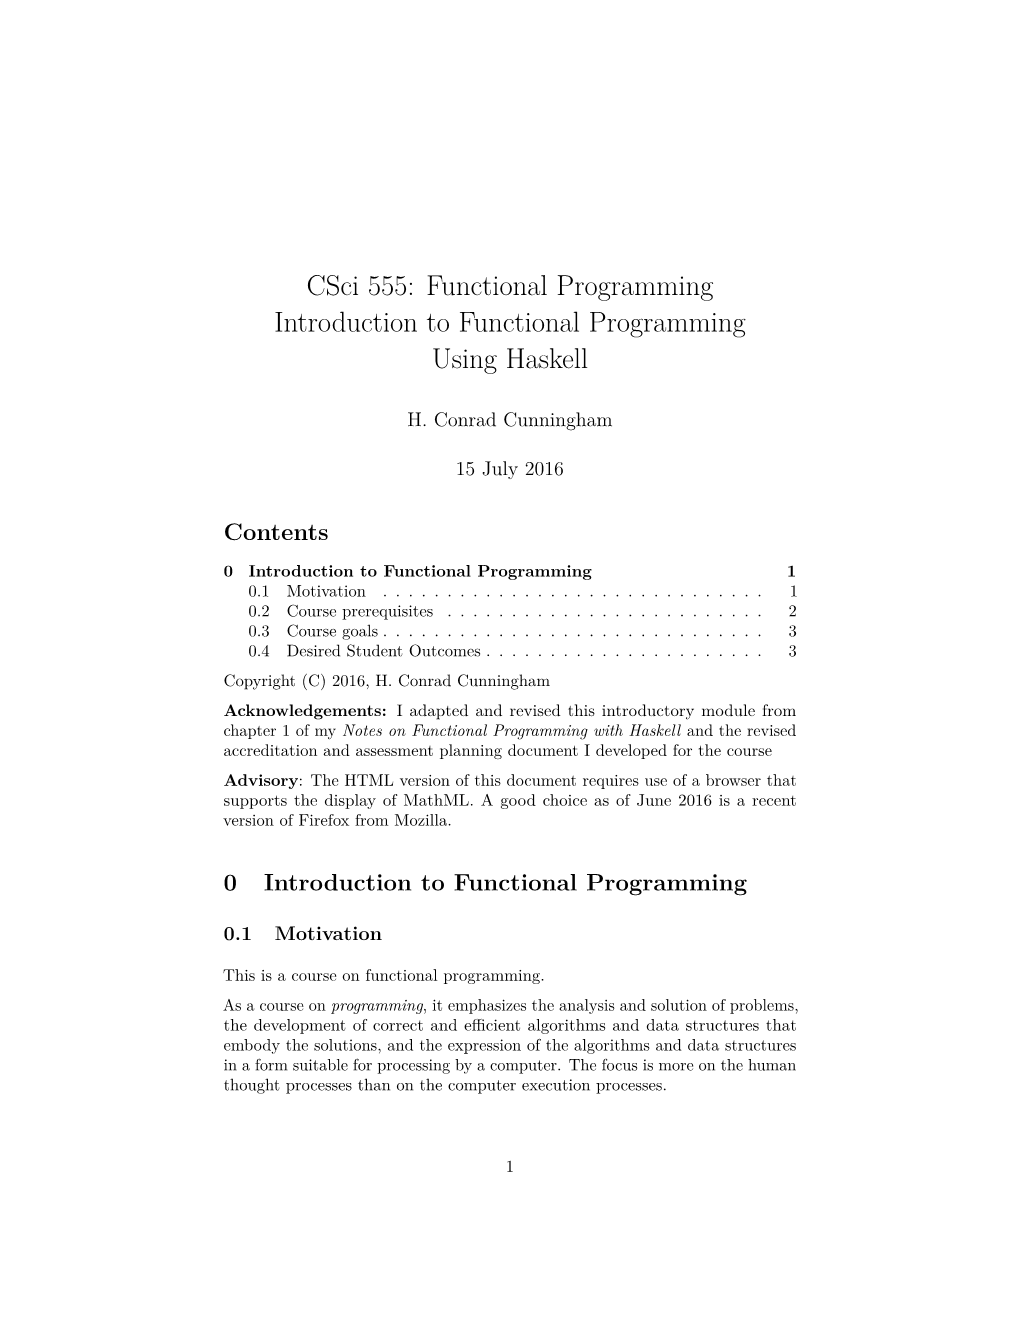 Csci 555: Functional Programming Introduction to Functional Programming Using Haskell